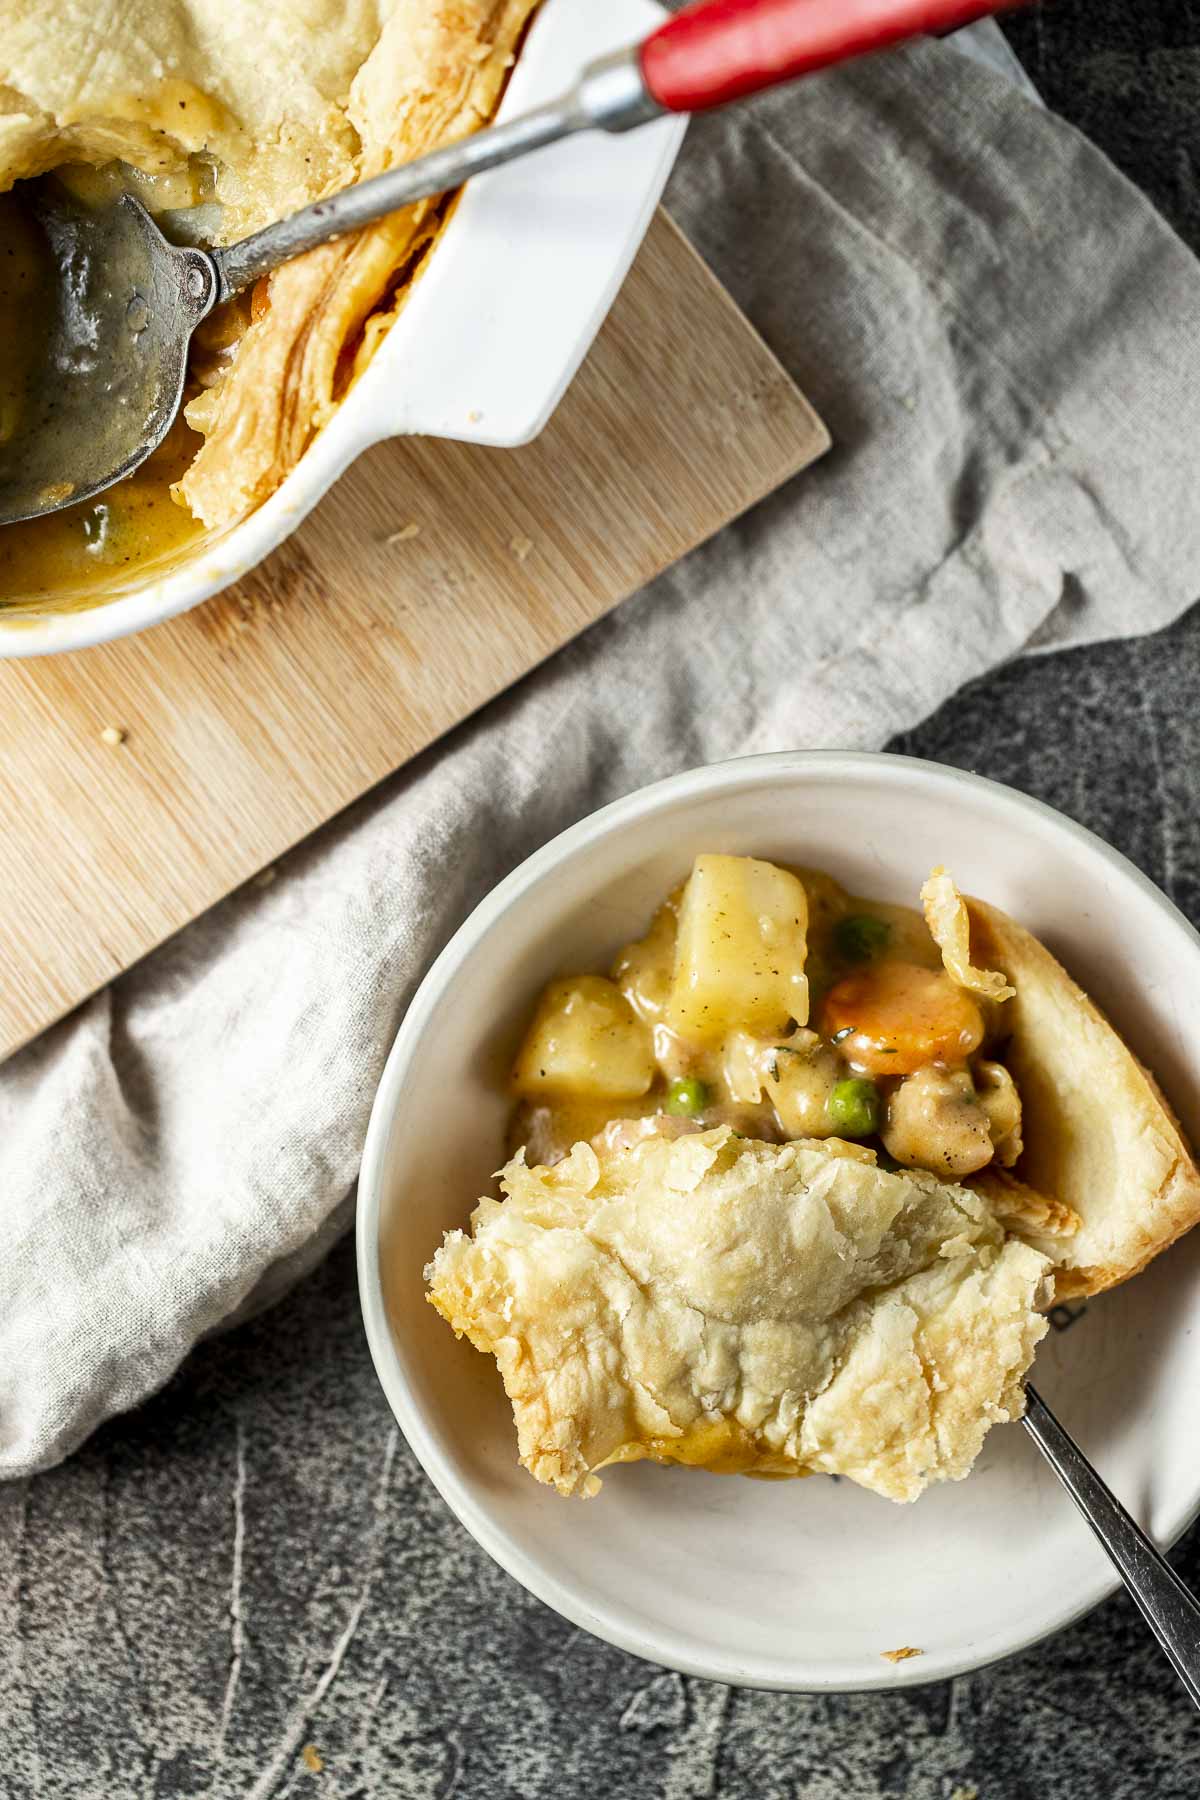 A piece of pot pie in a white bowl next to a larger dish of pot pie on a wooden board.